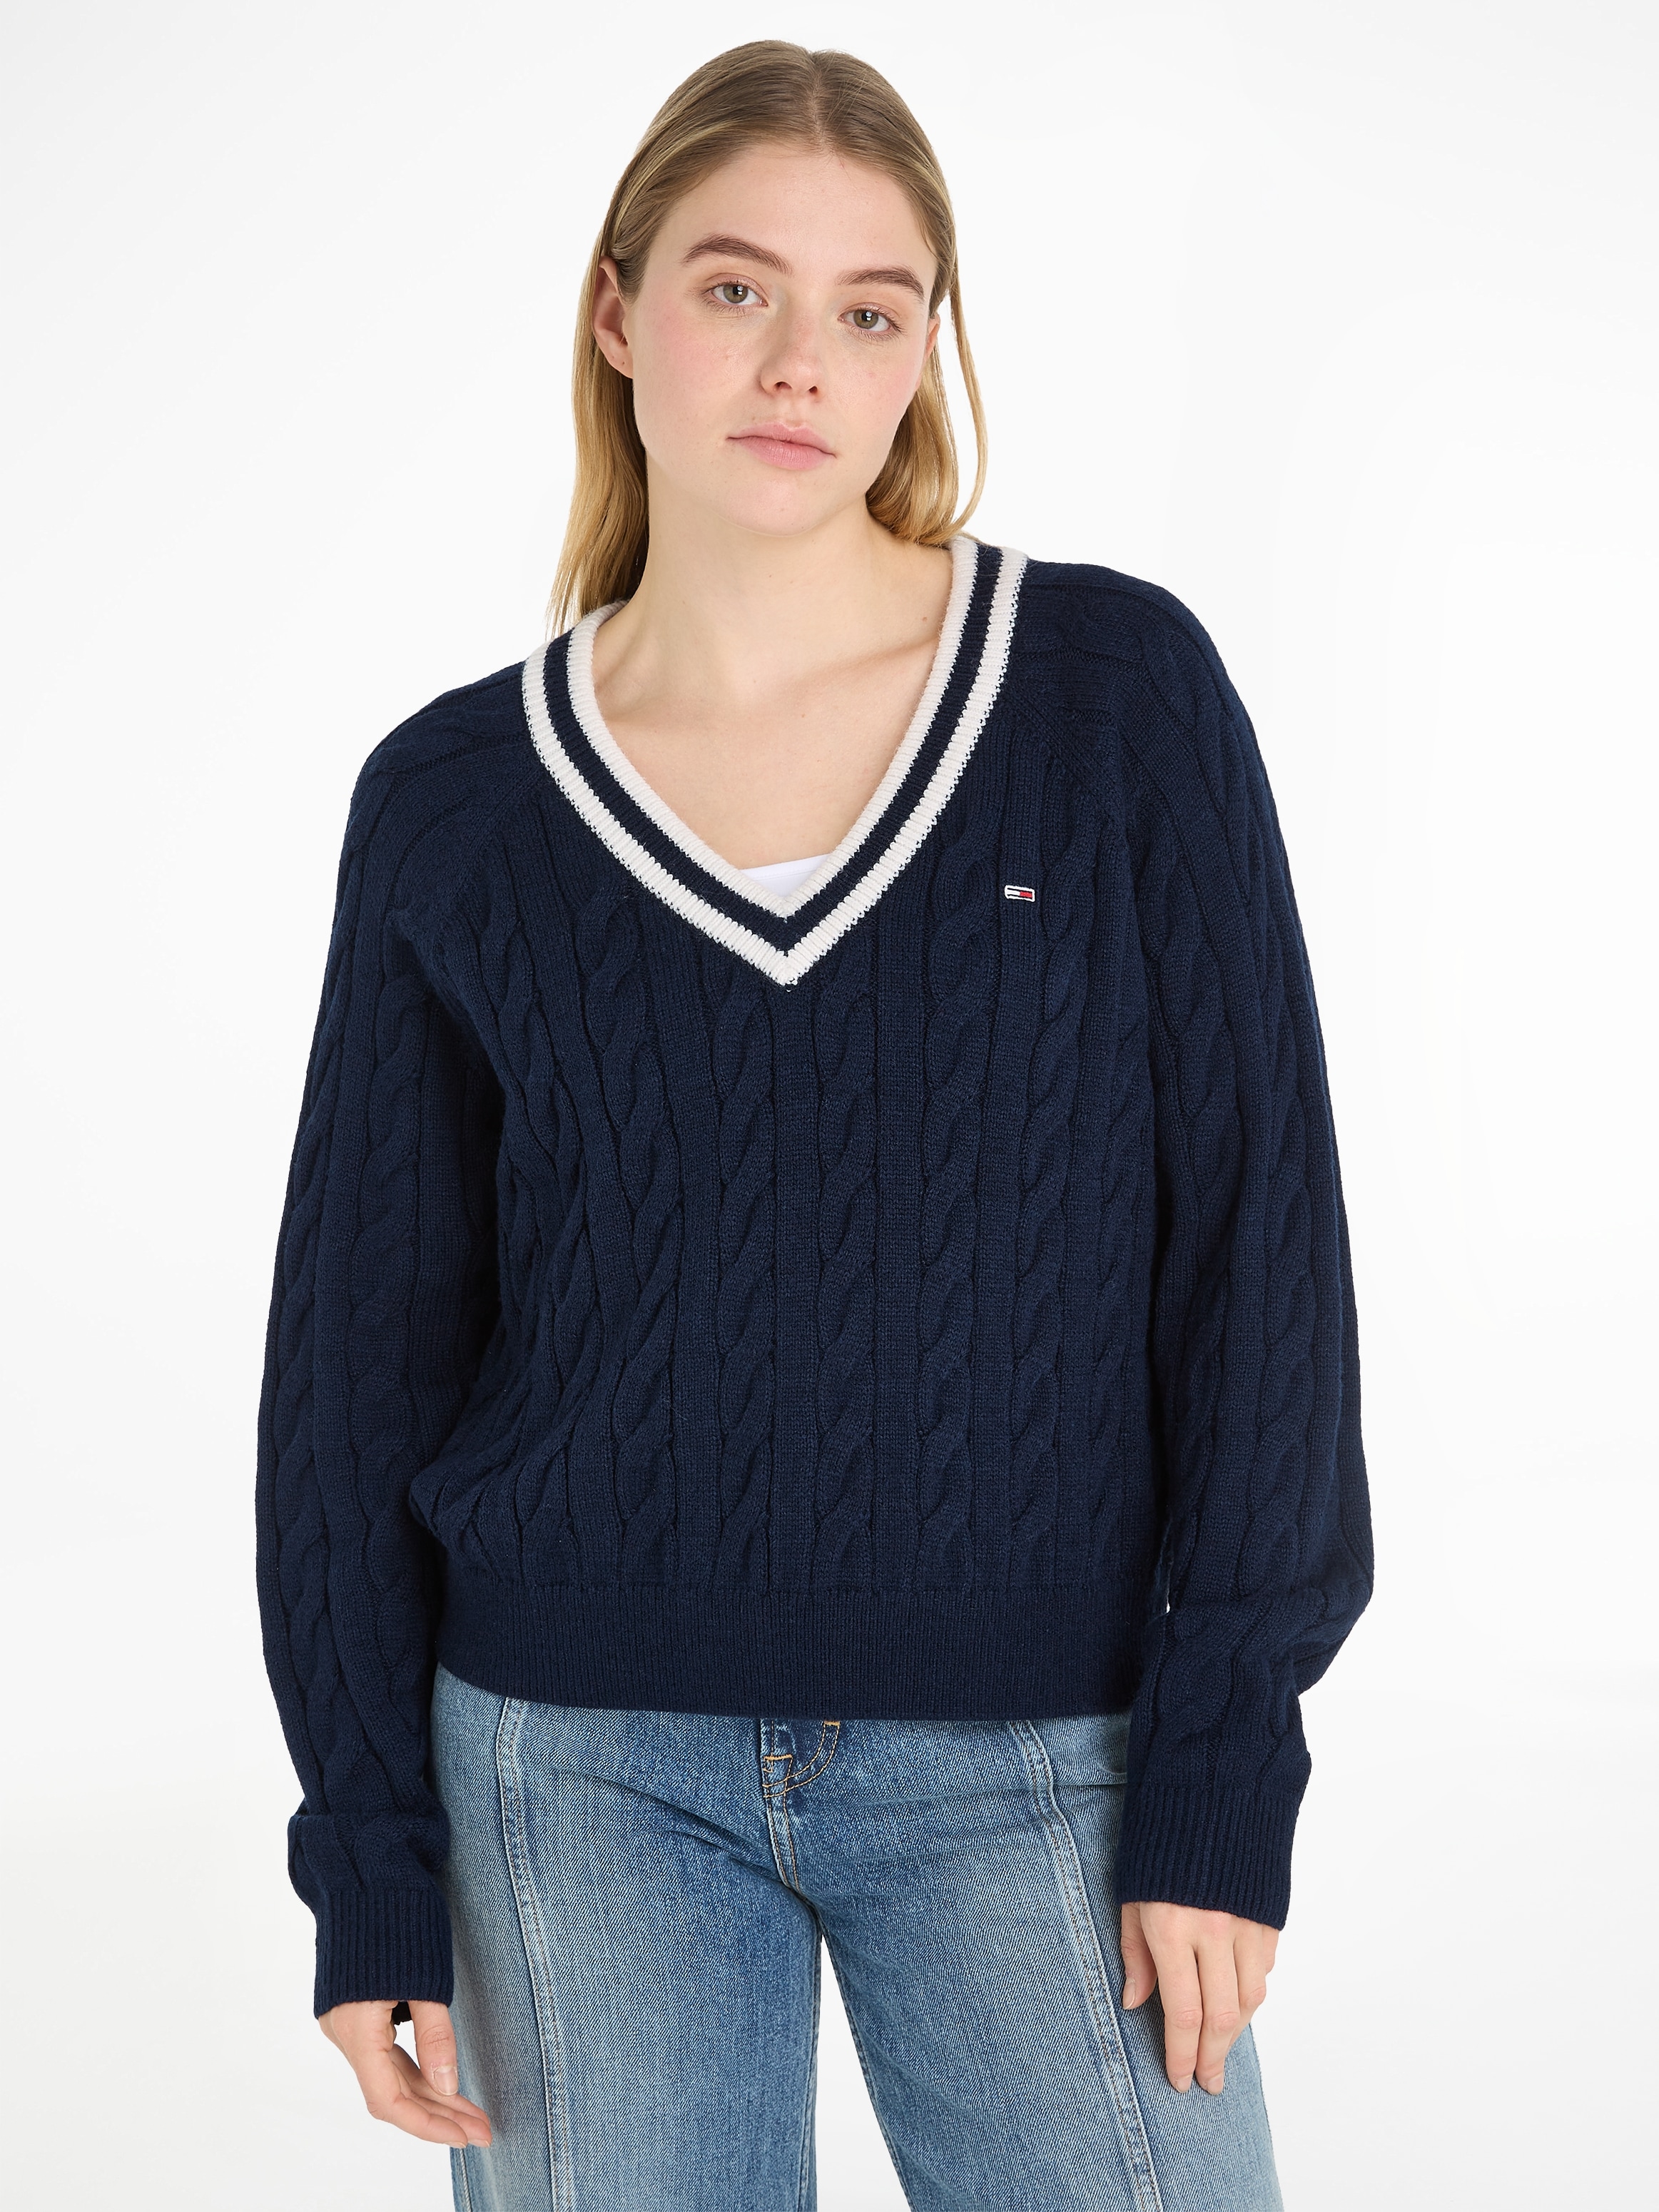 SWEATER«, V-Ausschnitt-Pullover mit Logostickerei V-NECK Jeans Tommy ♕ »TJW CABLE bei